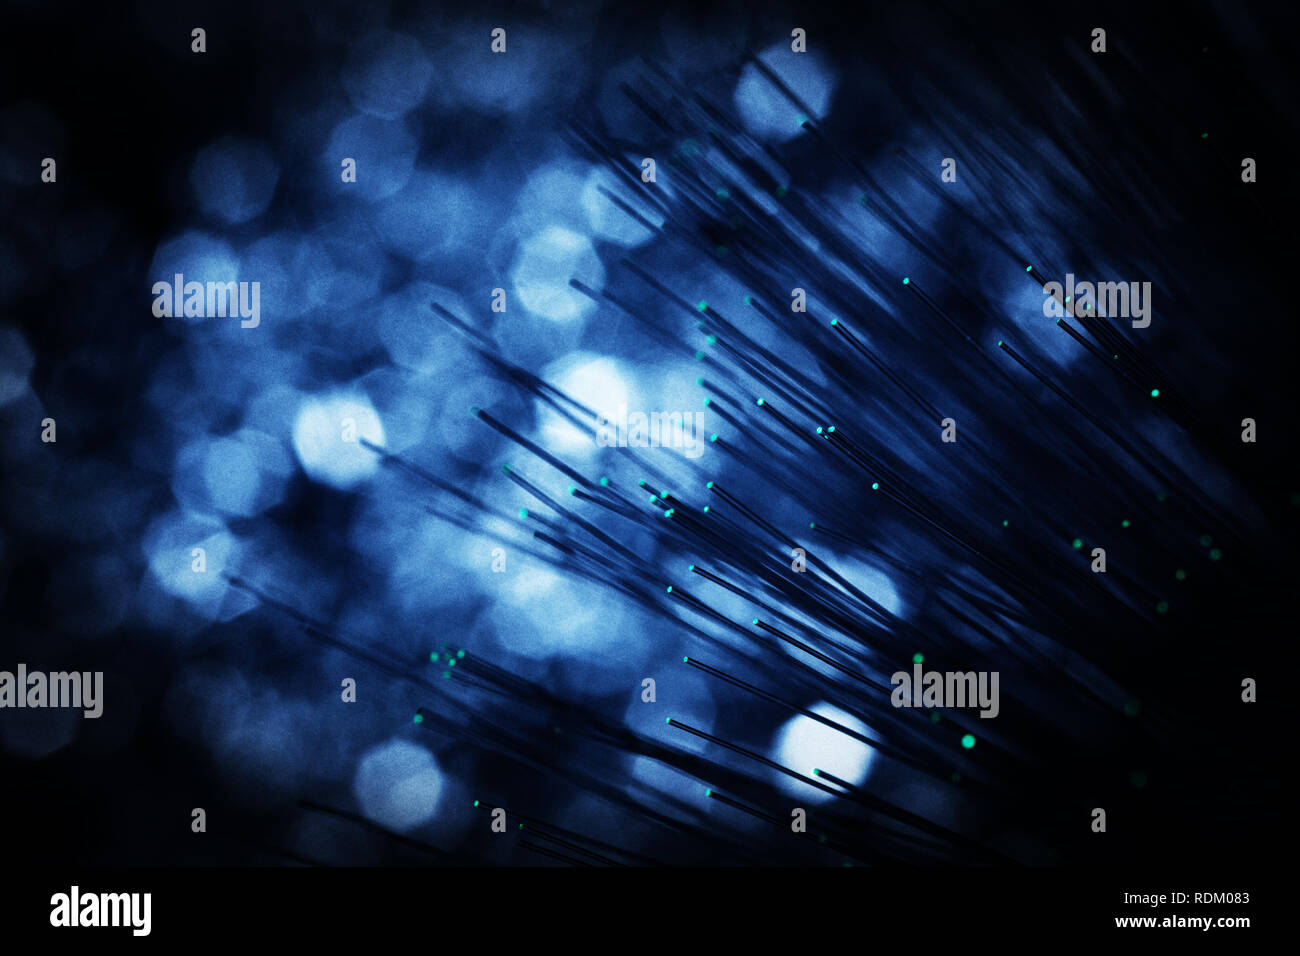 Fibre optic with lights Stock Photo